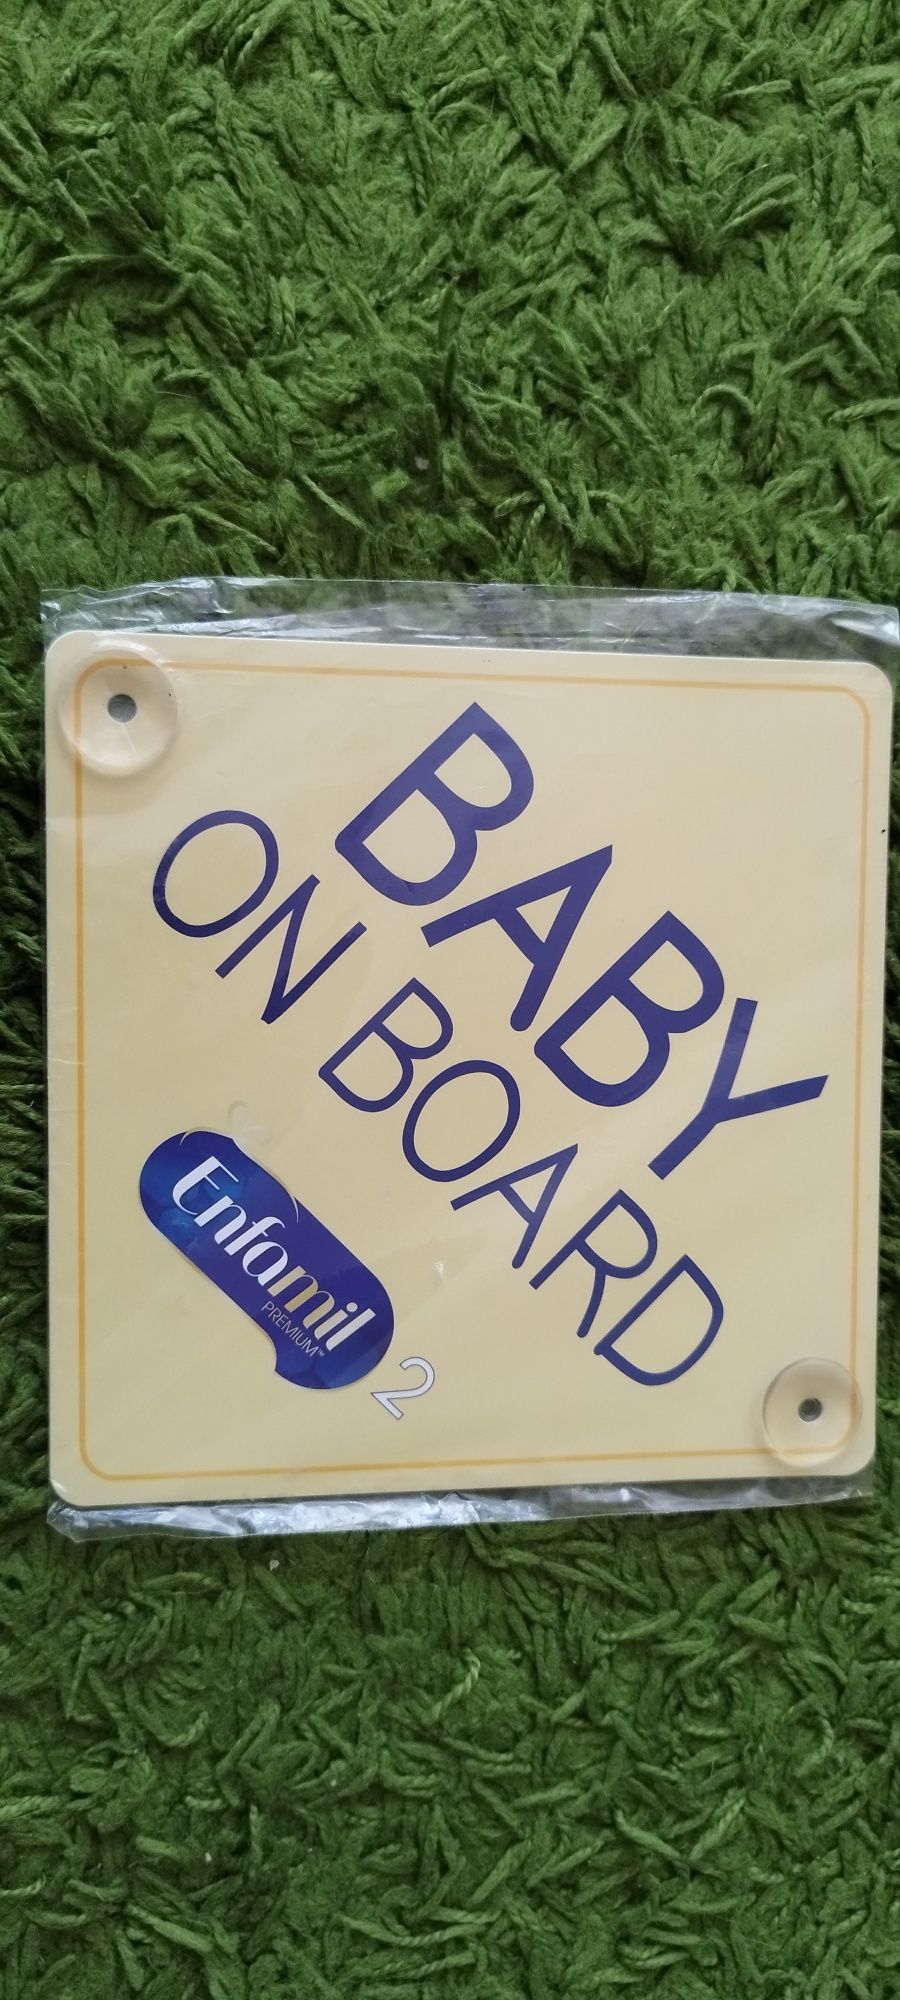 Napis "baby on board"